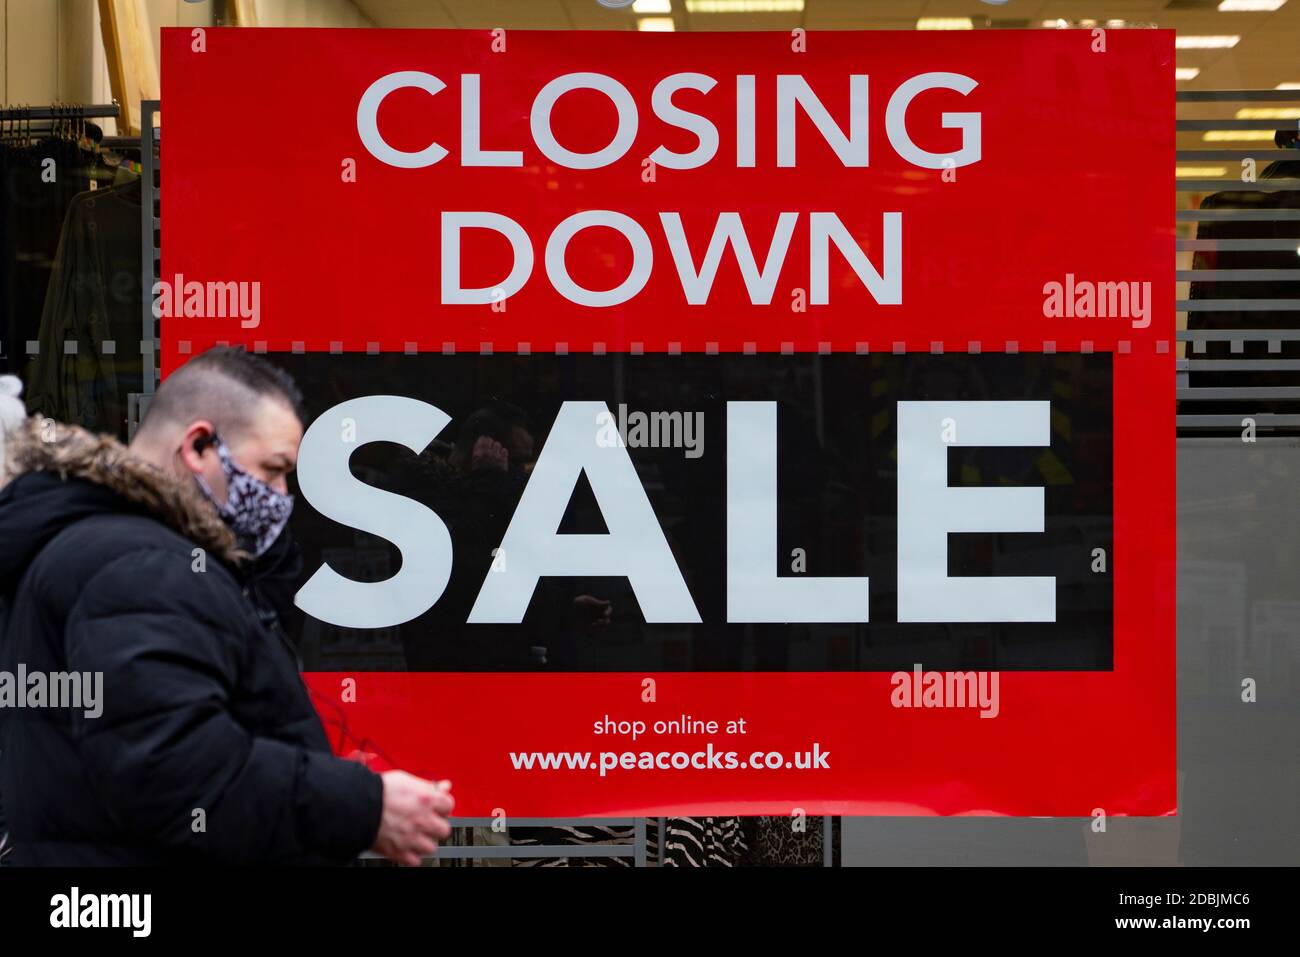 Motherwell, Scotland, UK. 1 November 2020. The Scottish Government today announced that from Friday 20 November, the most severe level 4 lockdown will be introduced in eleven Scottish council areas. This means non essential shops will close and bars, restaurants and cafes. Pictured; Closing down sale sign in Peacocks shop on shopping arcade.    Iain Masterton/Alamy Live News Stock Photo